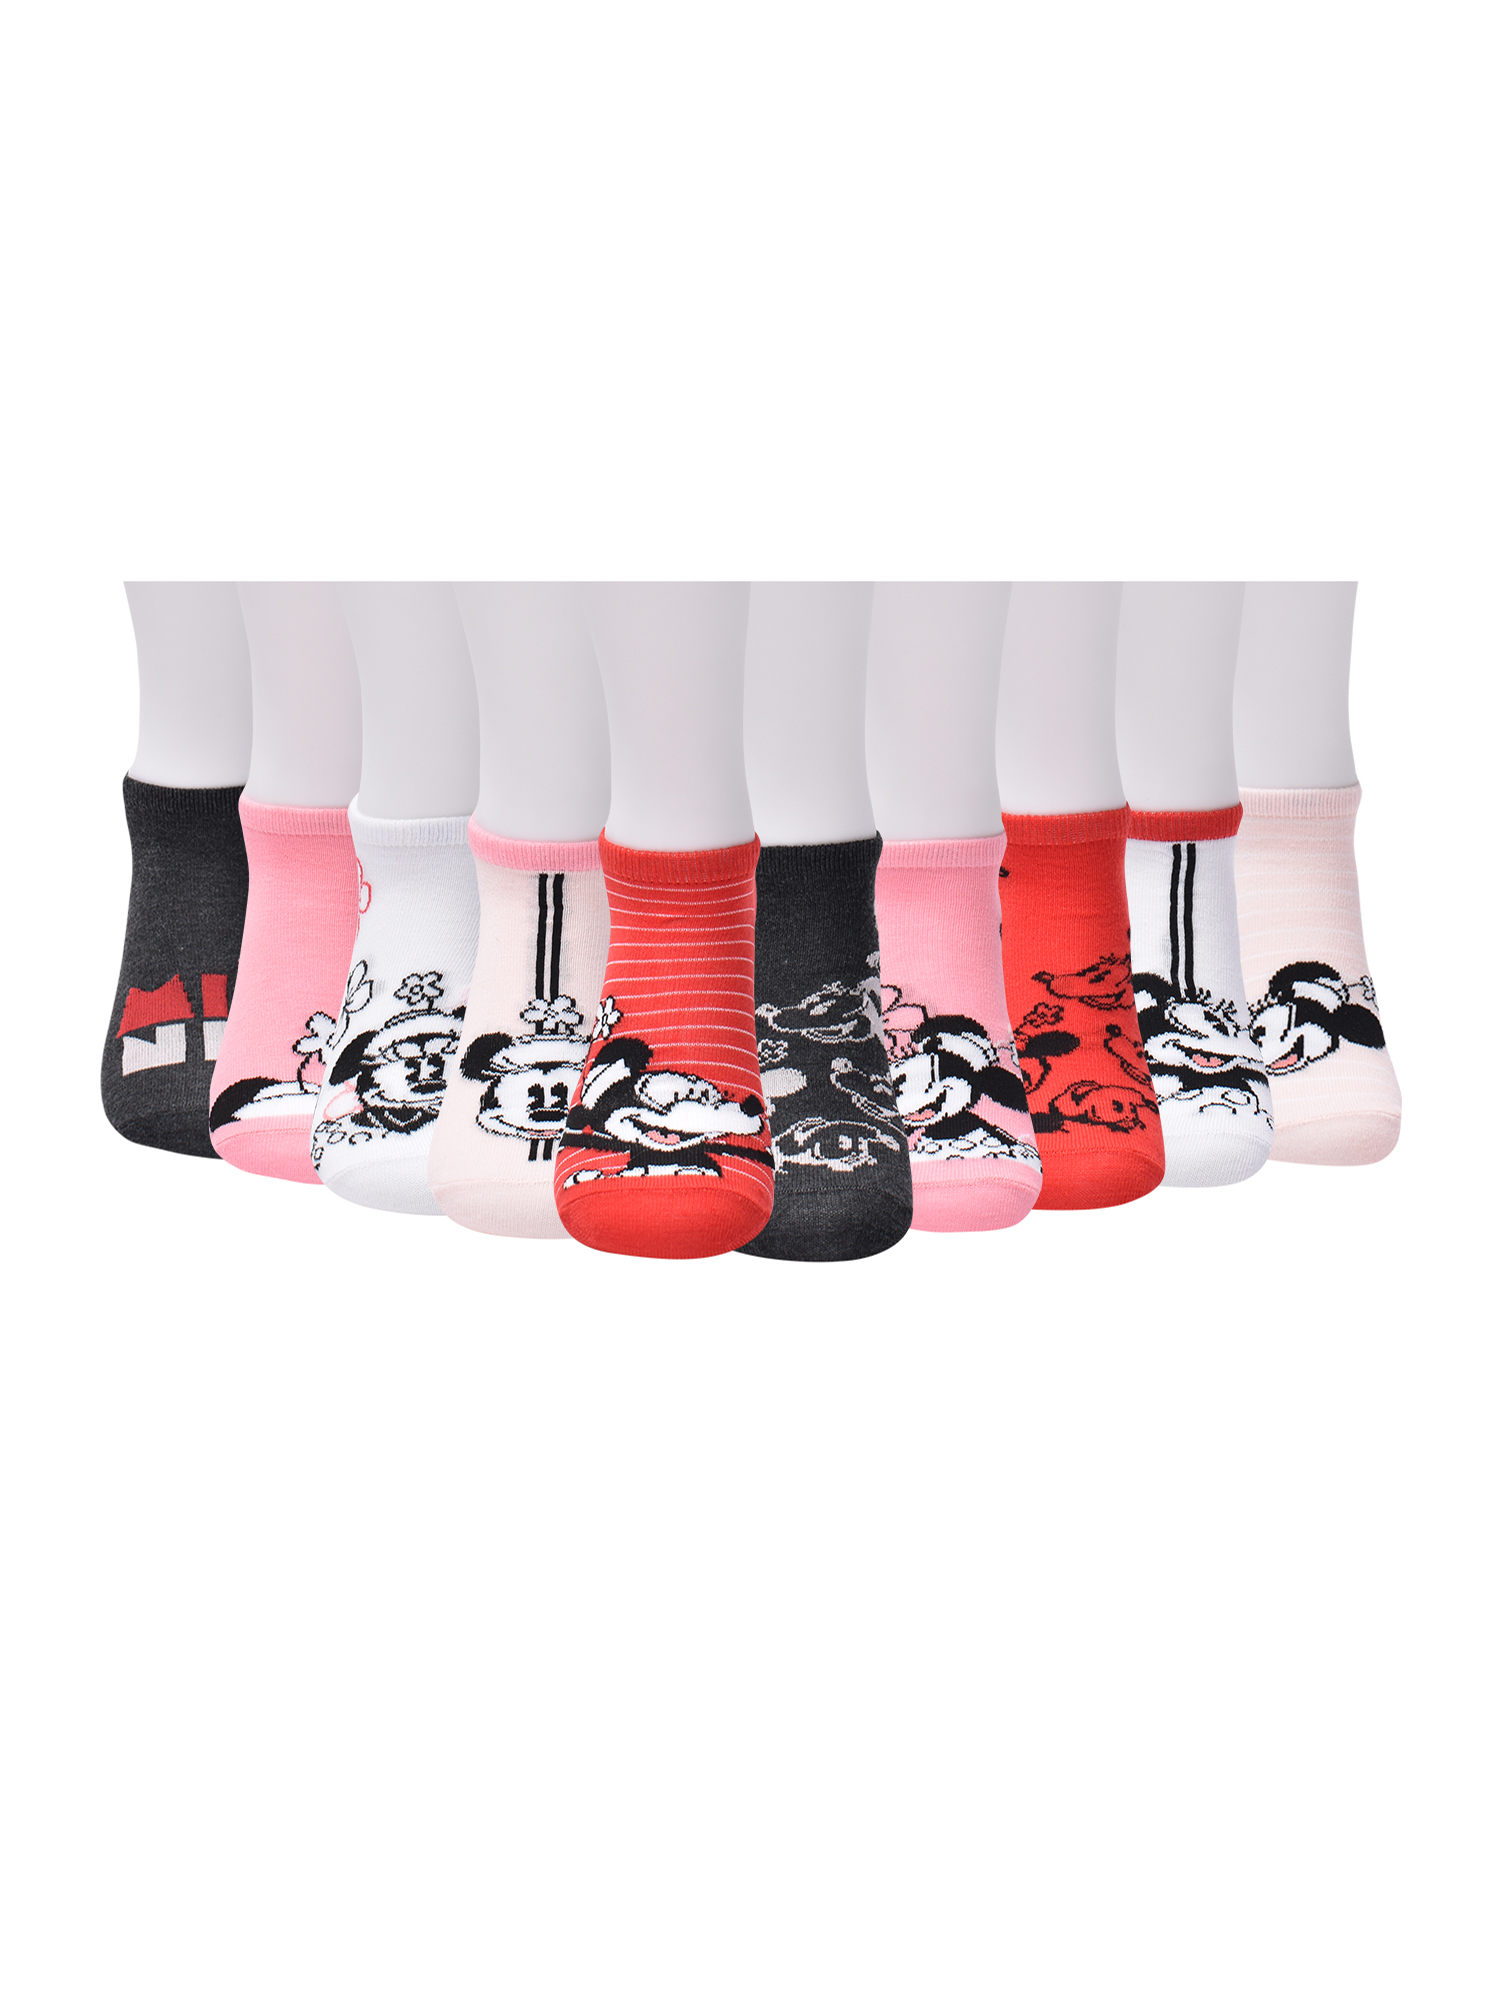 Disney Minnie Mouse Womens Graphic Super No Show Socks, 10-Pack, Sizes 4-10 - image 4 of 5